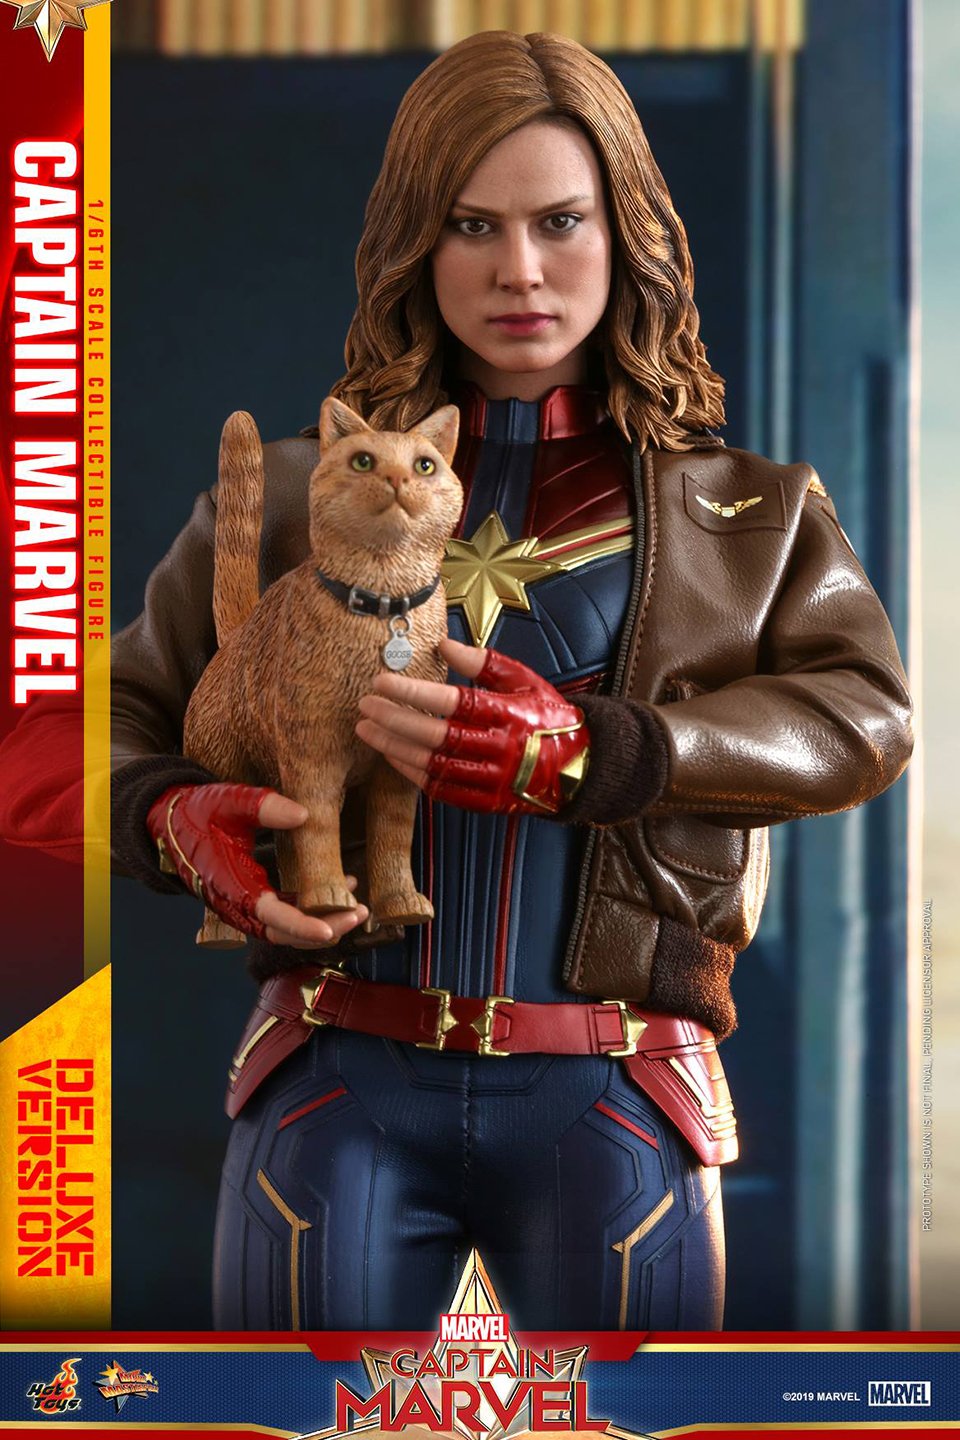 Check Out Hot Toys Action Figure Of Brie Larson As Captain Marvel